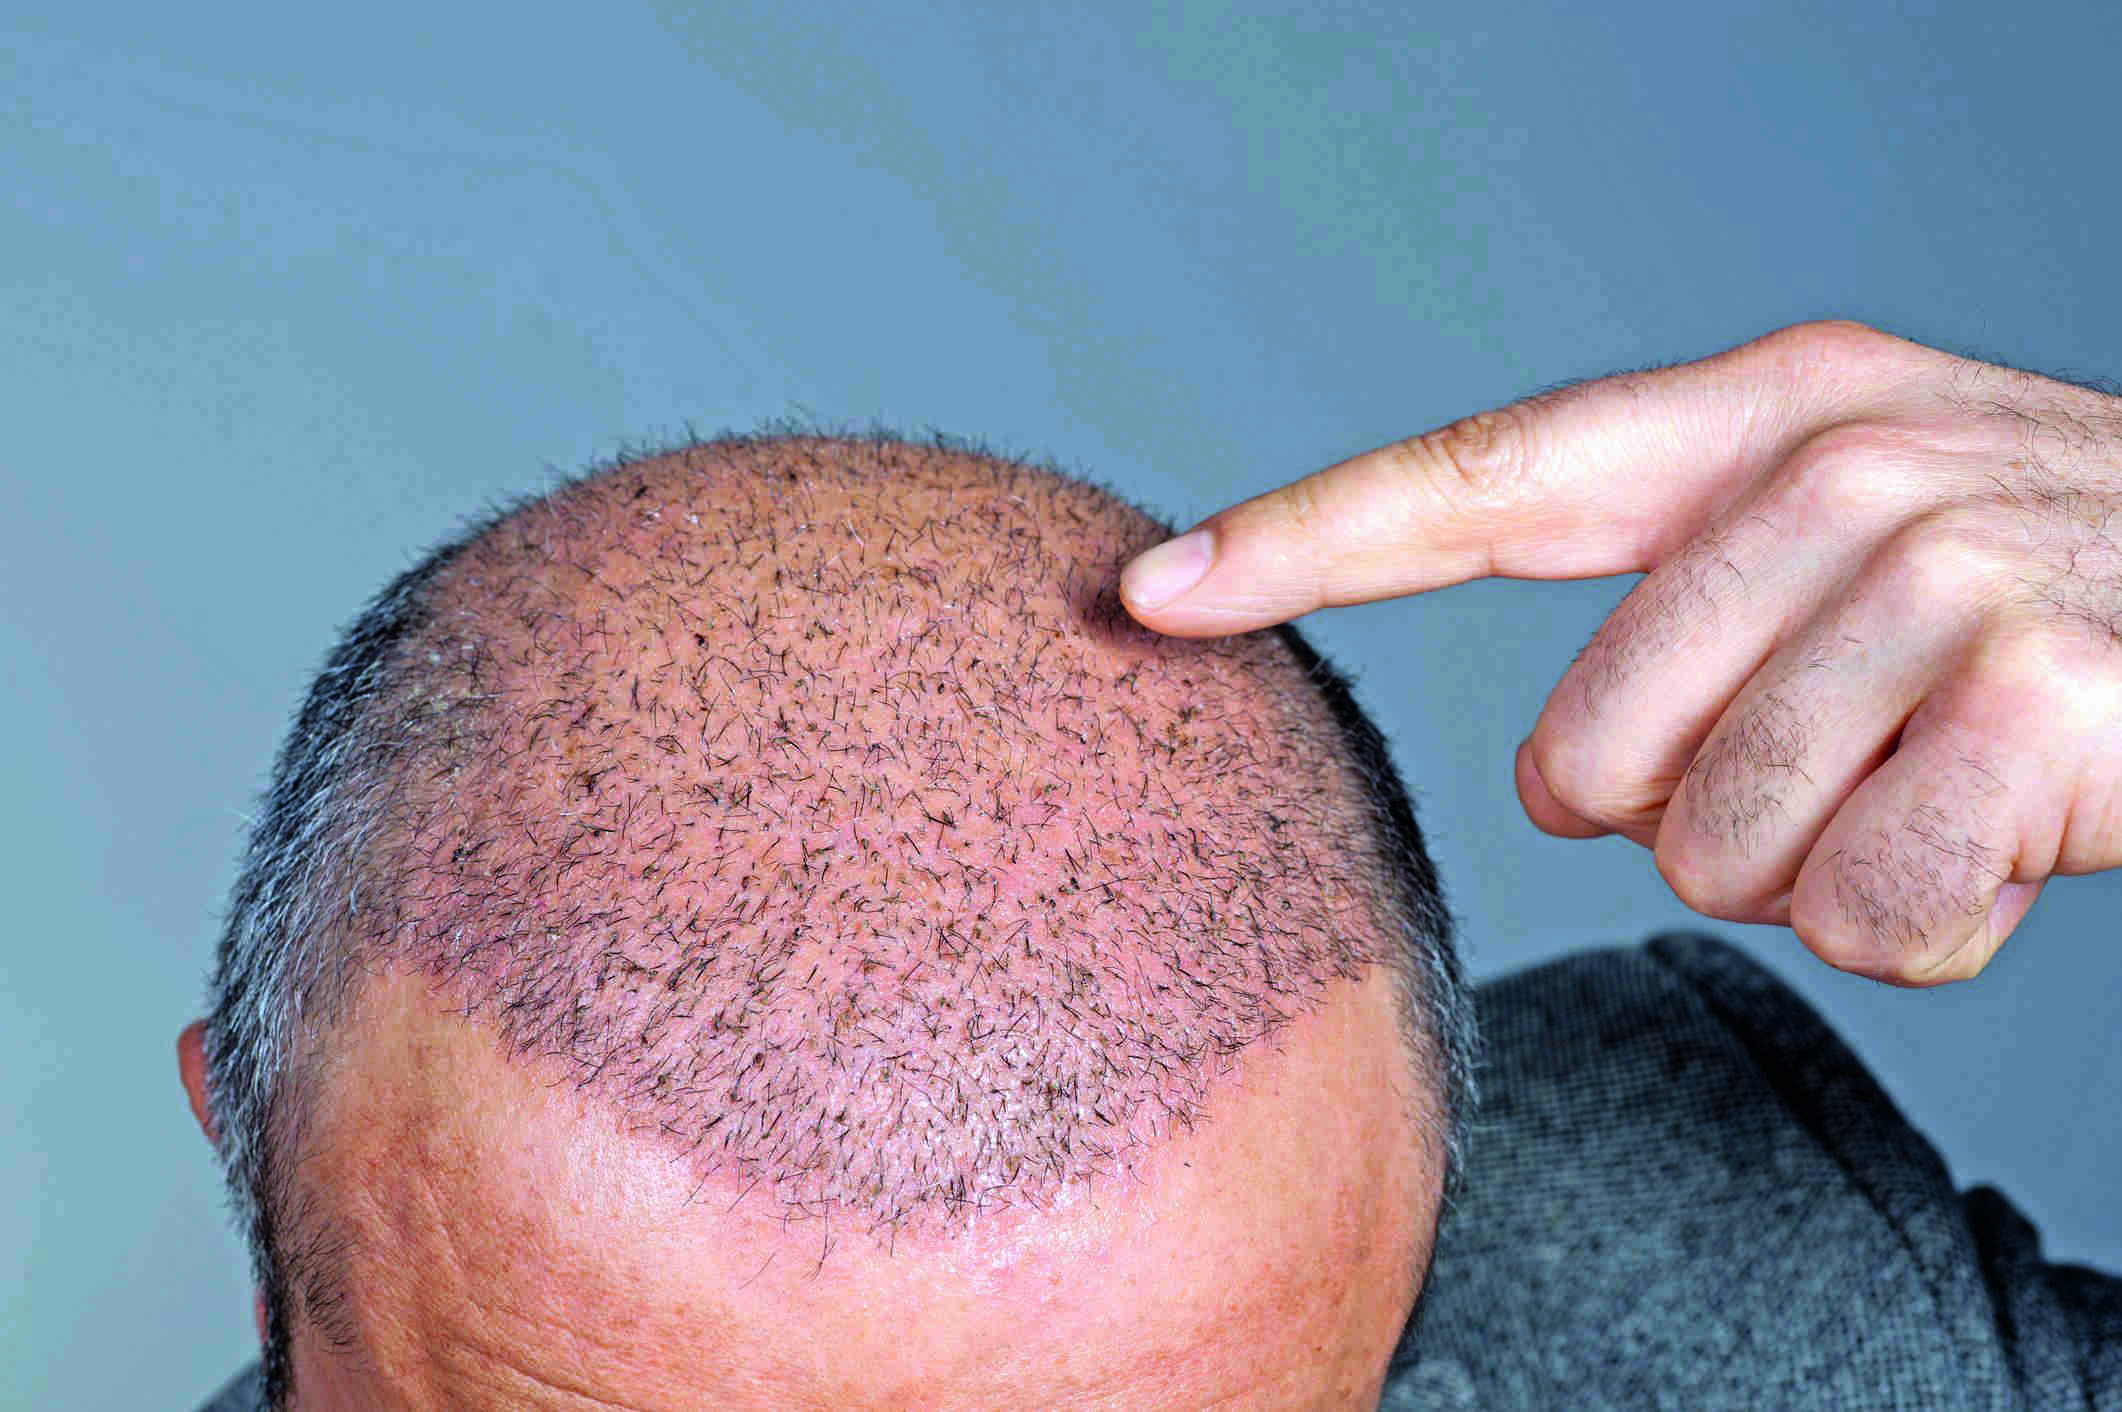 HC expresses concern over hair transplant by unprofessionals